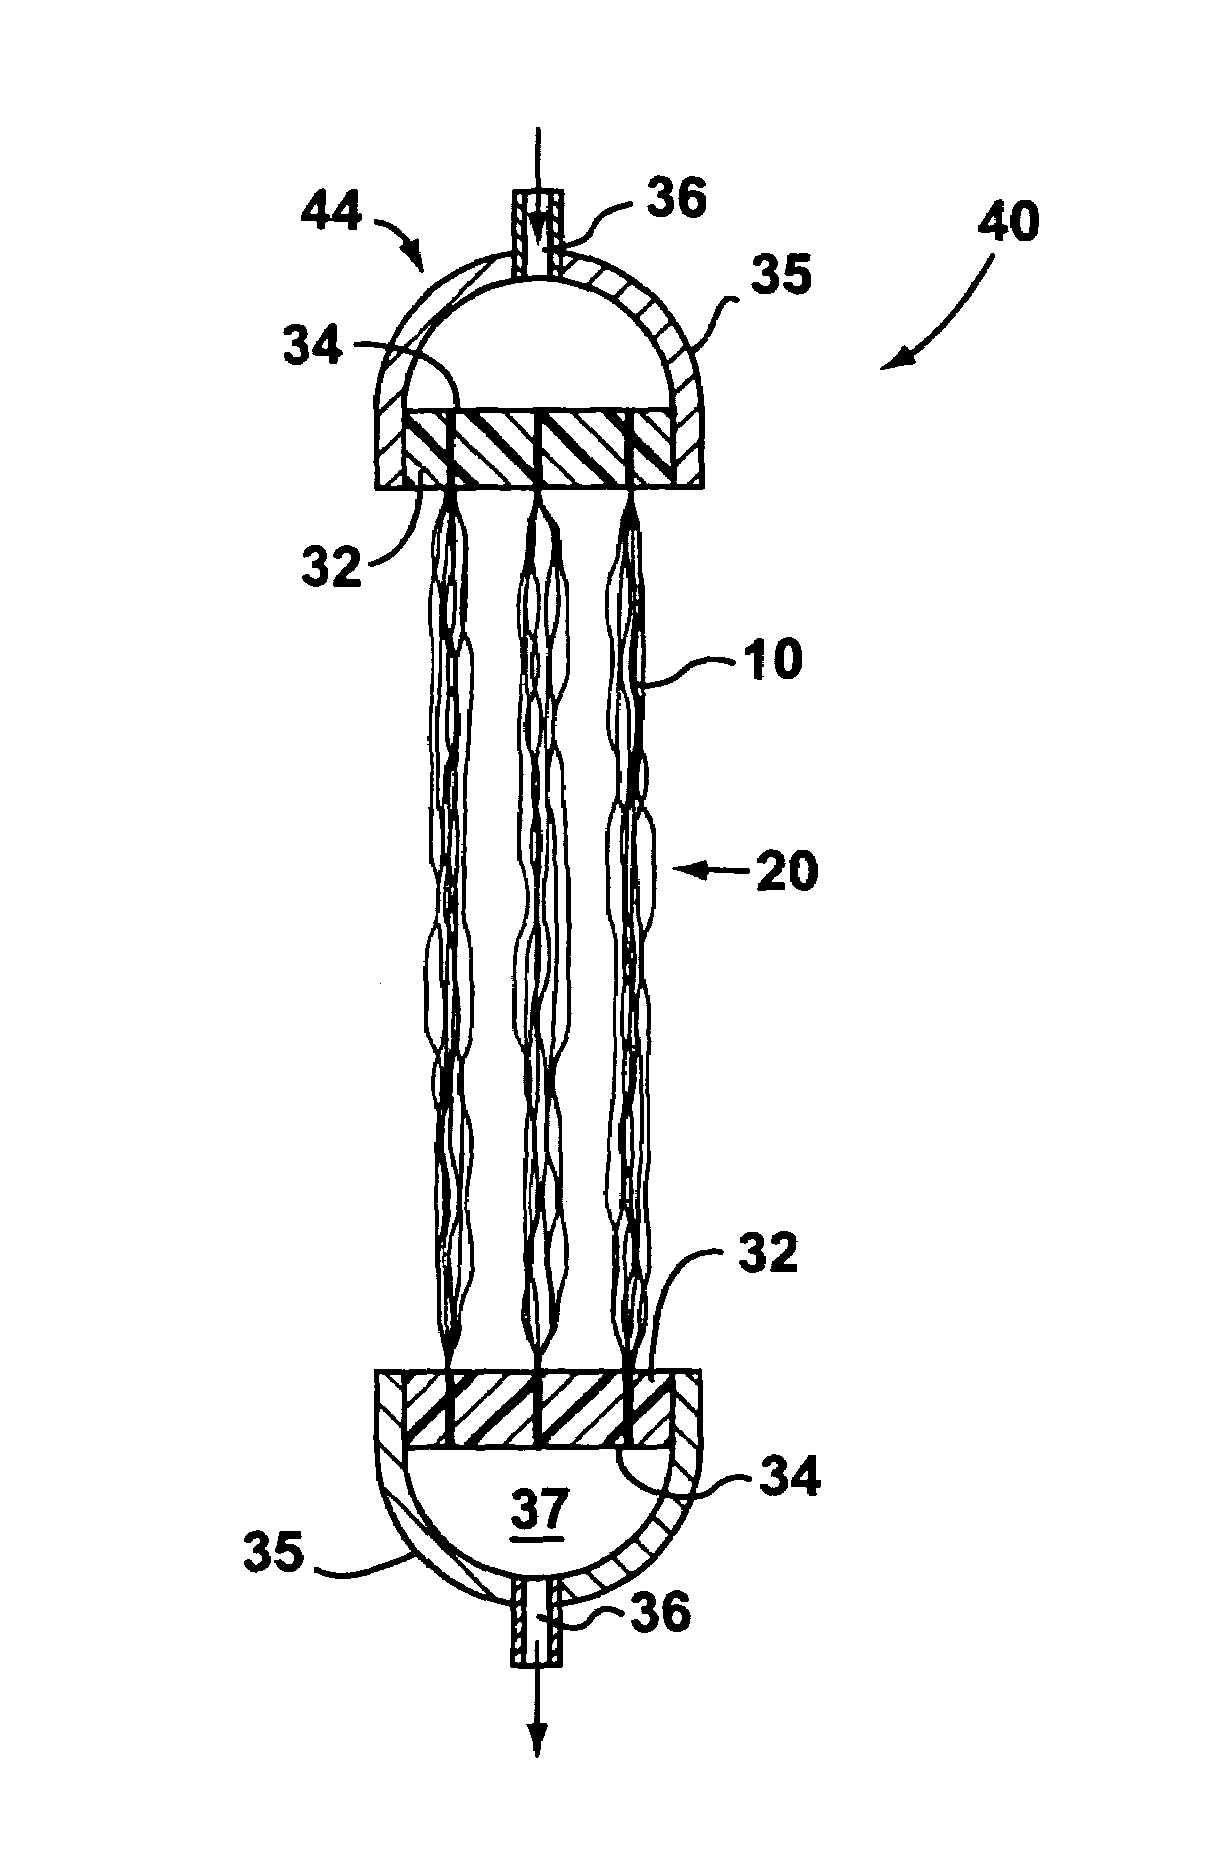 Supported biofilm apparatus and process